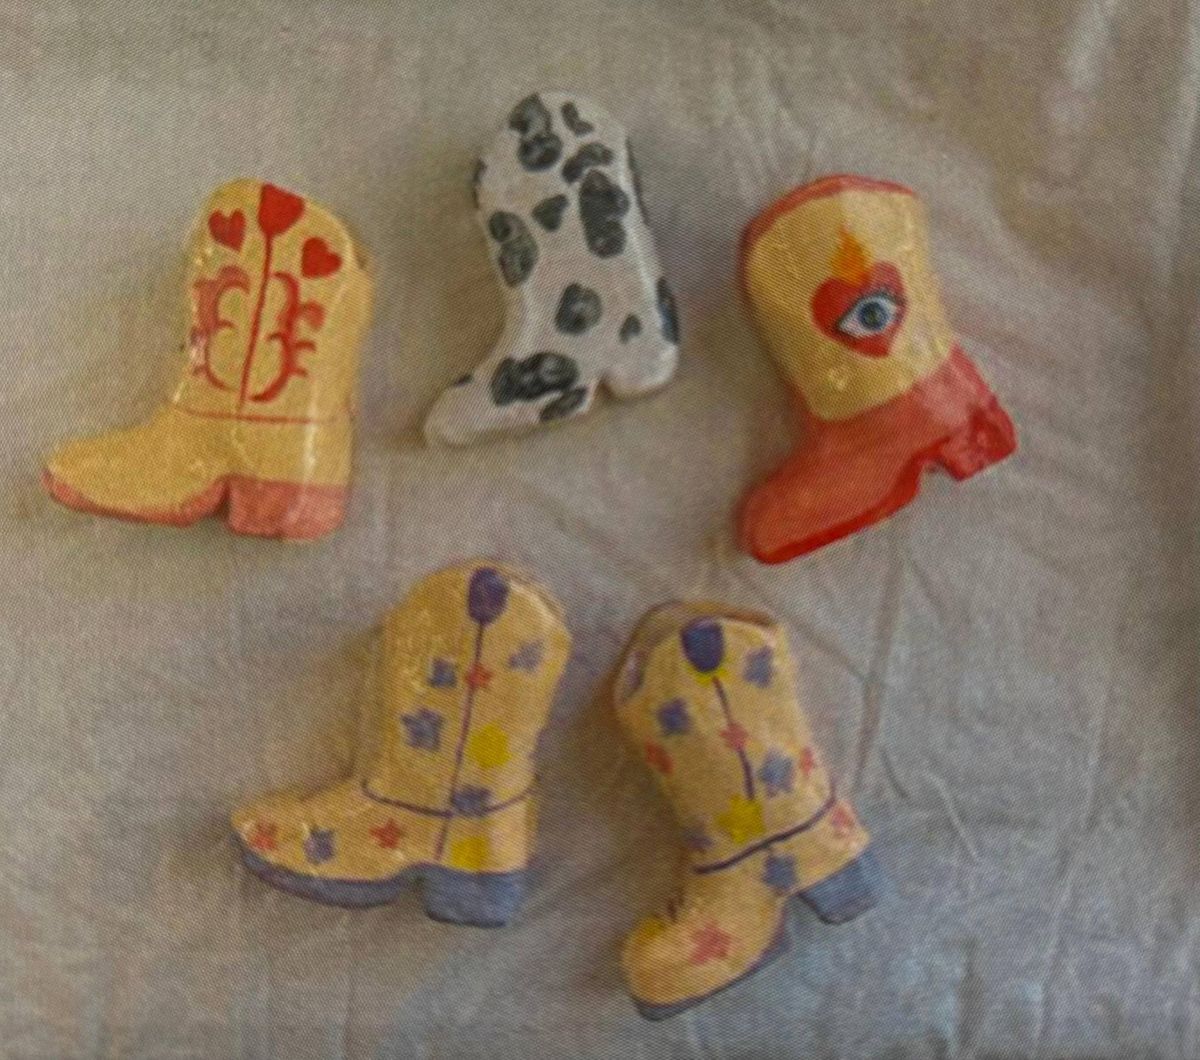  Youth Handbuilding: These Boots Aren't Made for Walkin'